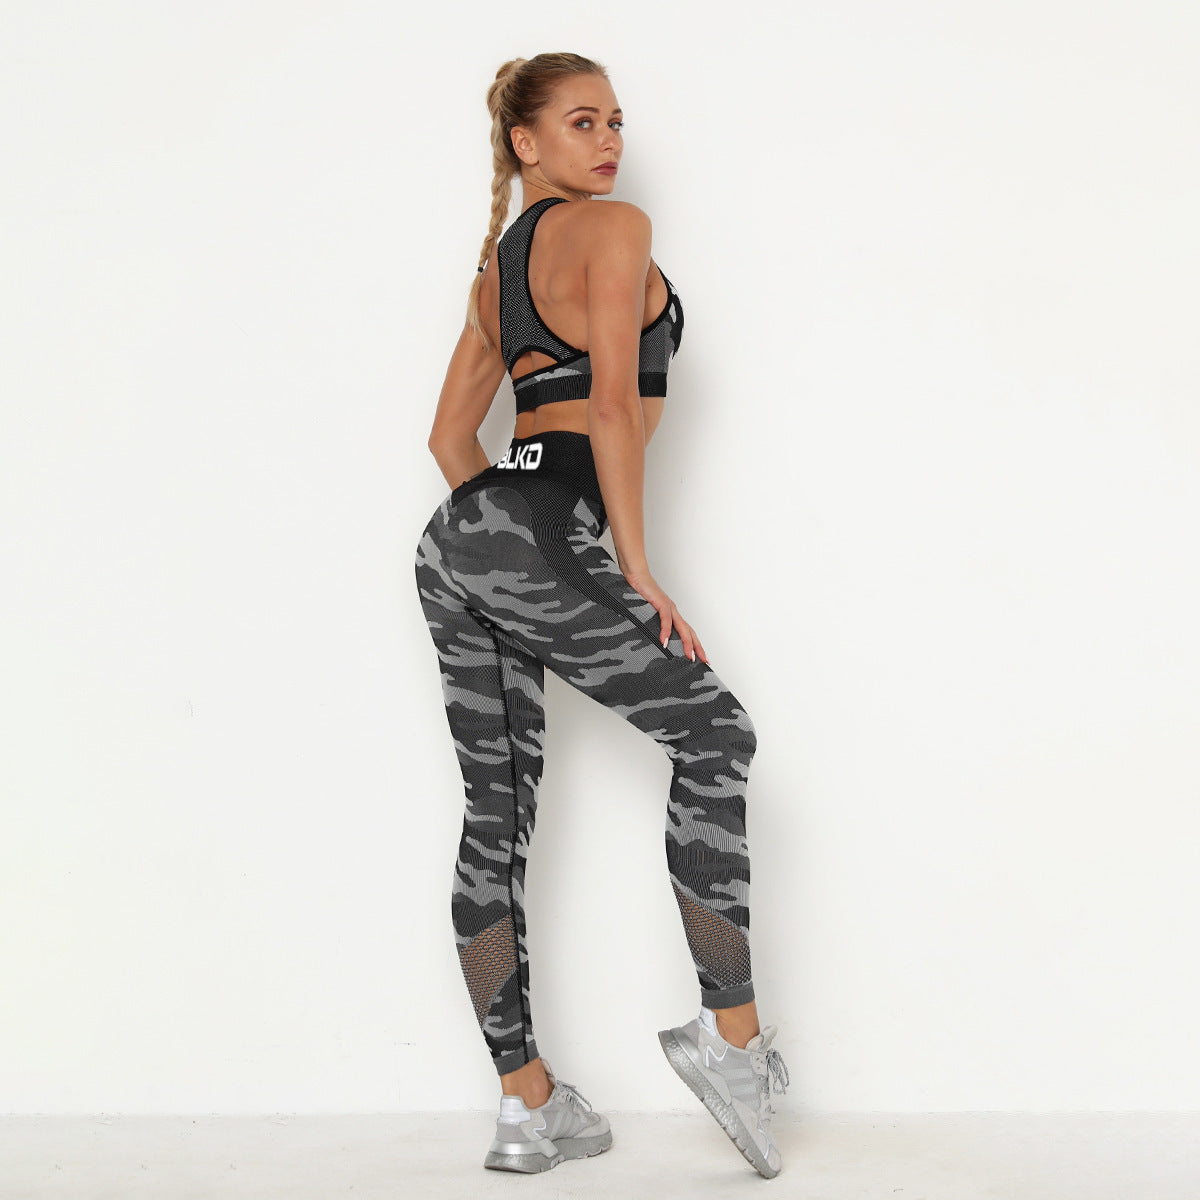 Black Camouflage BLKD - Blacked 2 Piece Yoga Seamless Fishnet Workout Outfit